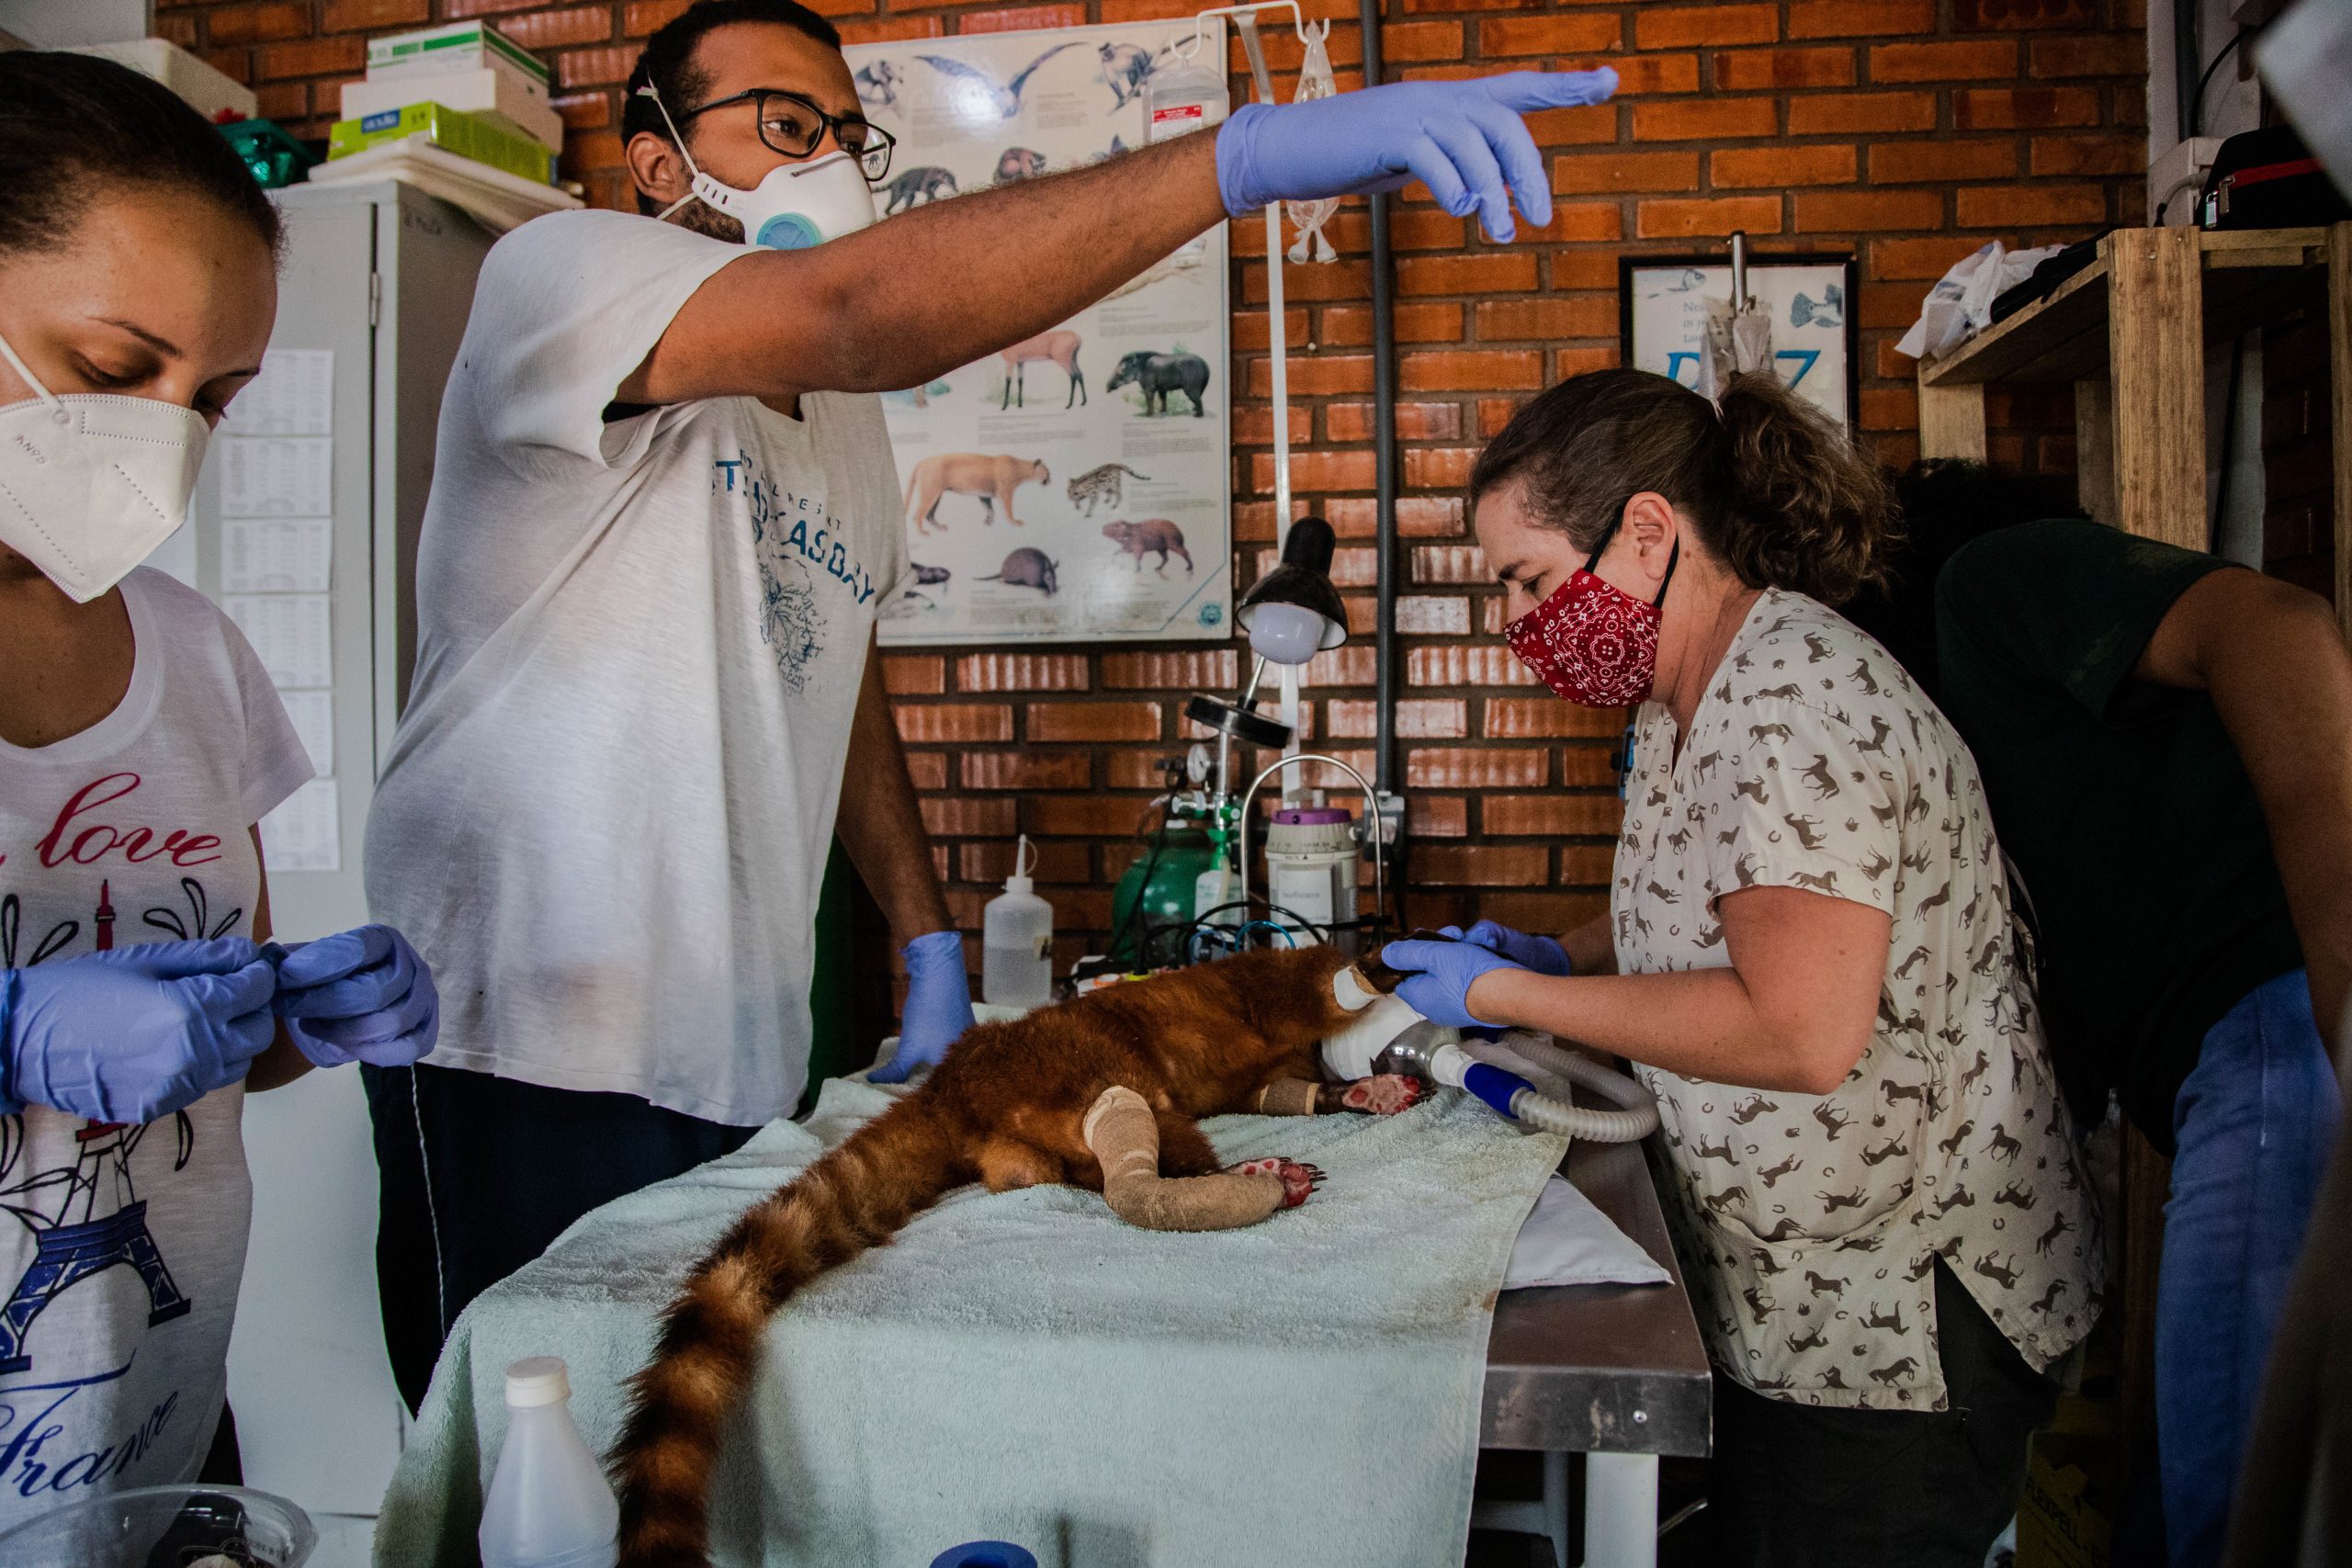 Volunteers and veterinarians change the bandages on a coati's burned paws after a wildfire in the Brazilian Pantanal, 2020.